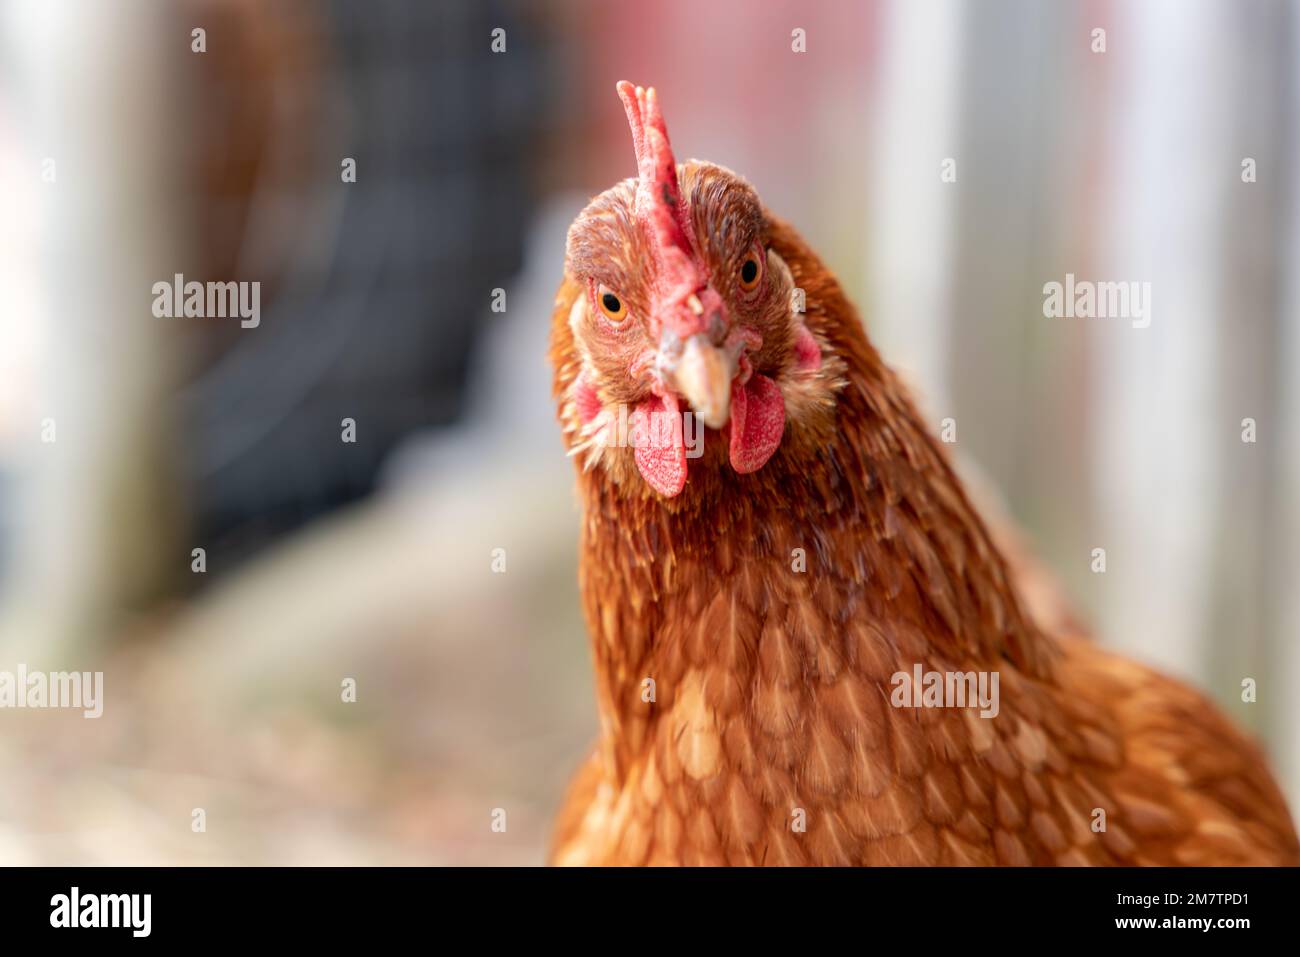 Regal chicken keeping a watchful eye on the situation. Stock Photo